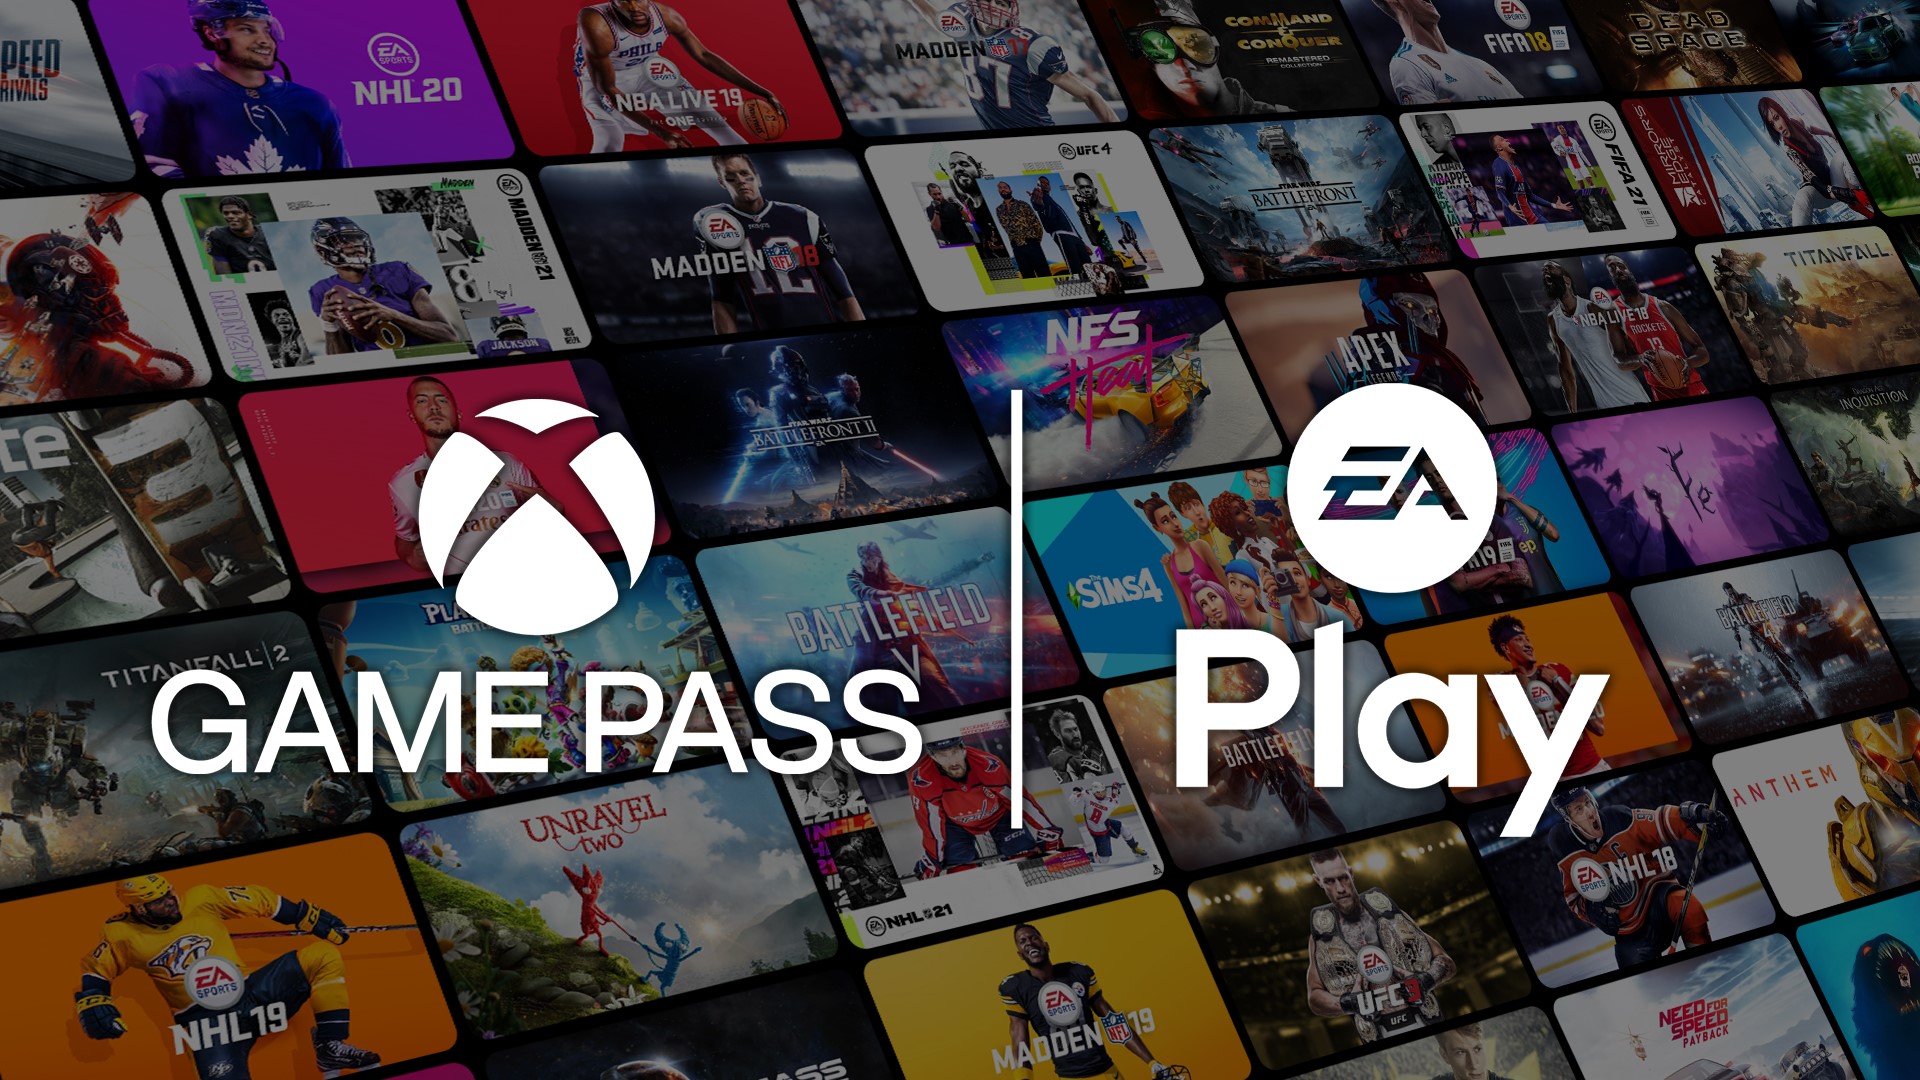 Xbox Game Pass Ultimate 3 Months XBOX | PC | Turkey 🔑